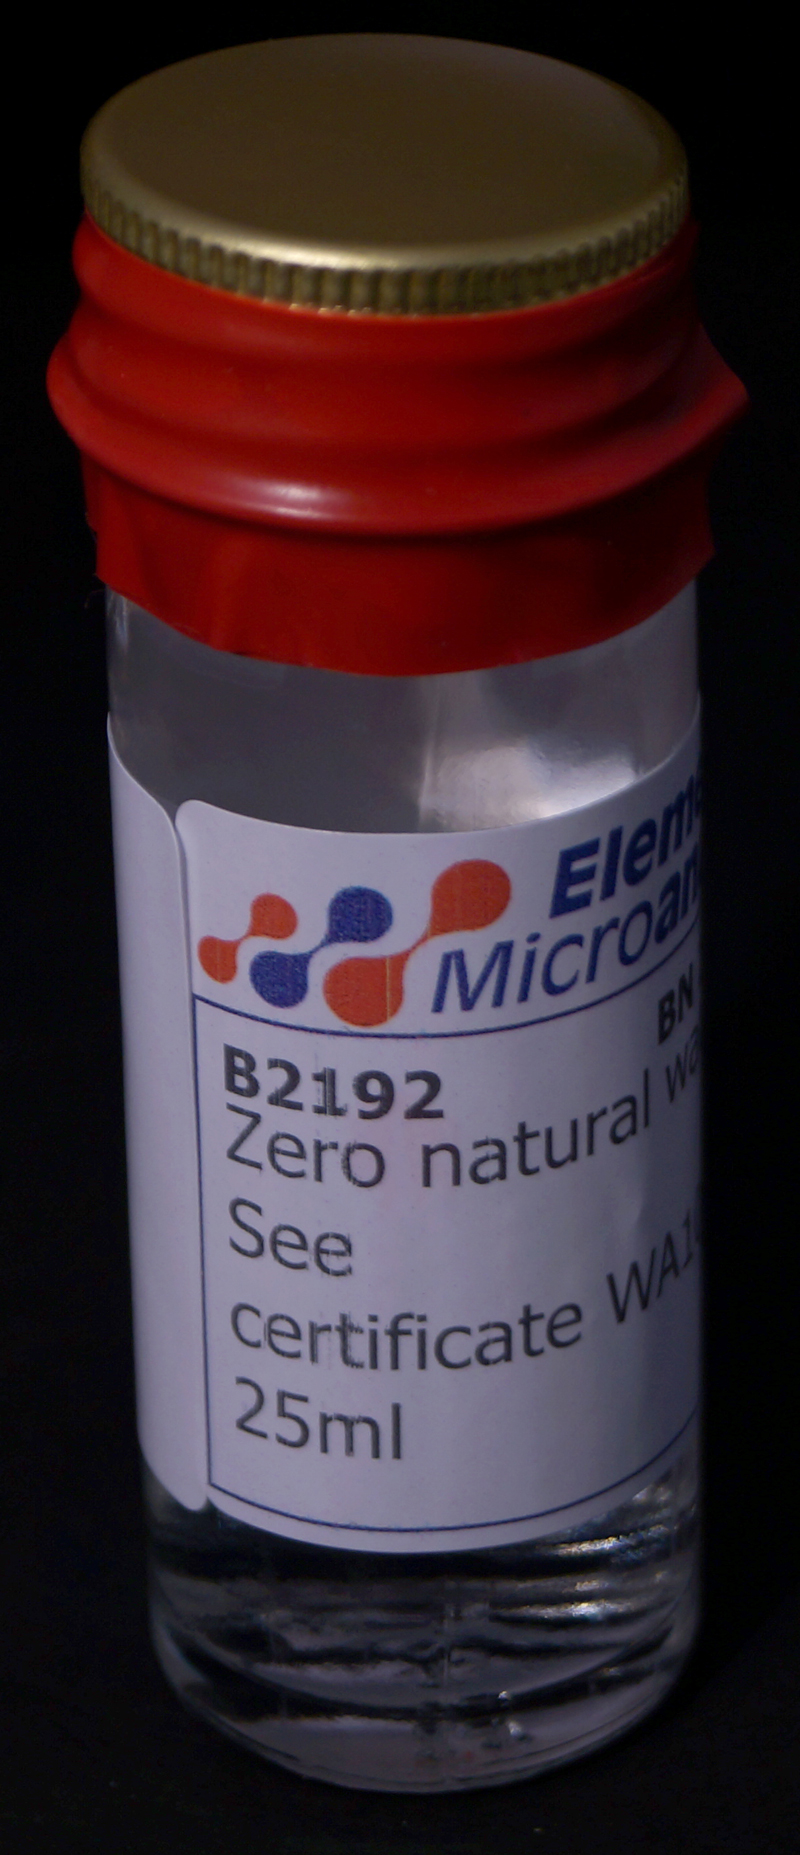 2H-and-18O-isotope-IRMS-standard-Zero-natural-water-See-certificate-WA102B-25ml